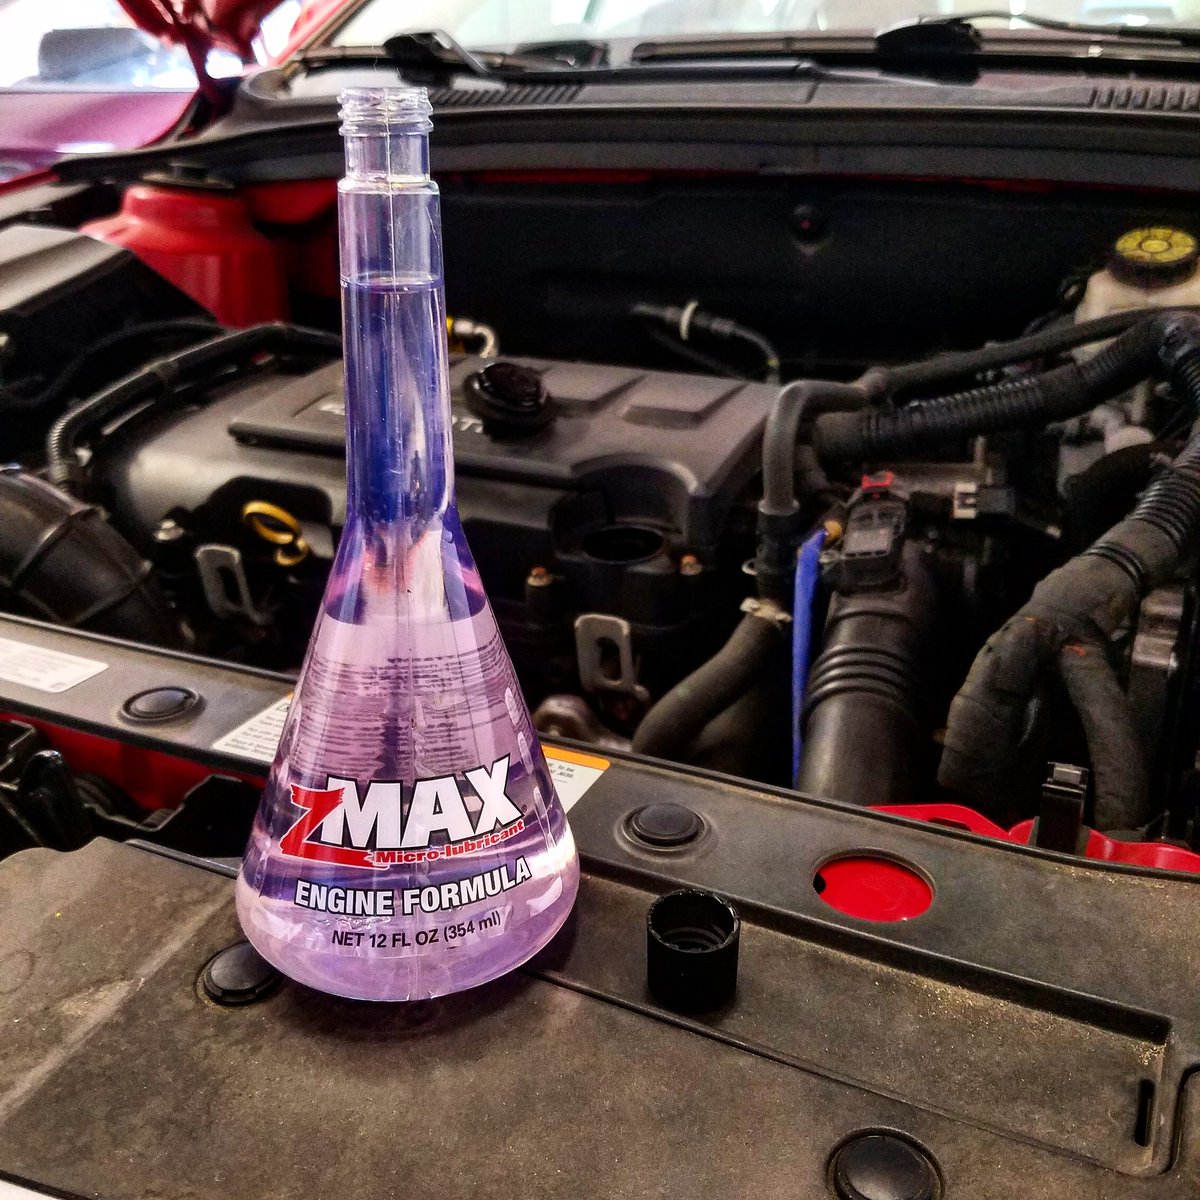 Something good is about to happen... #zMAX #protectyourengine